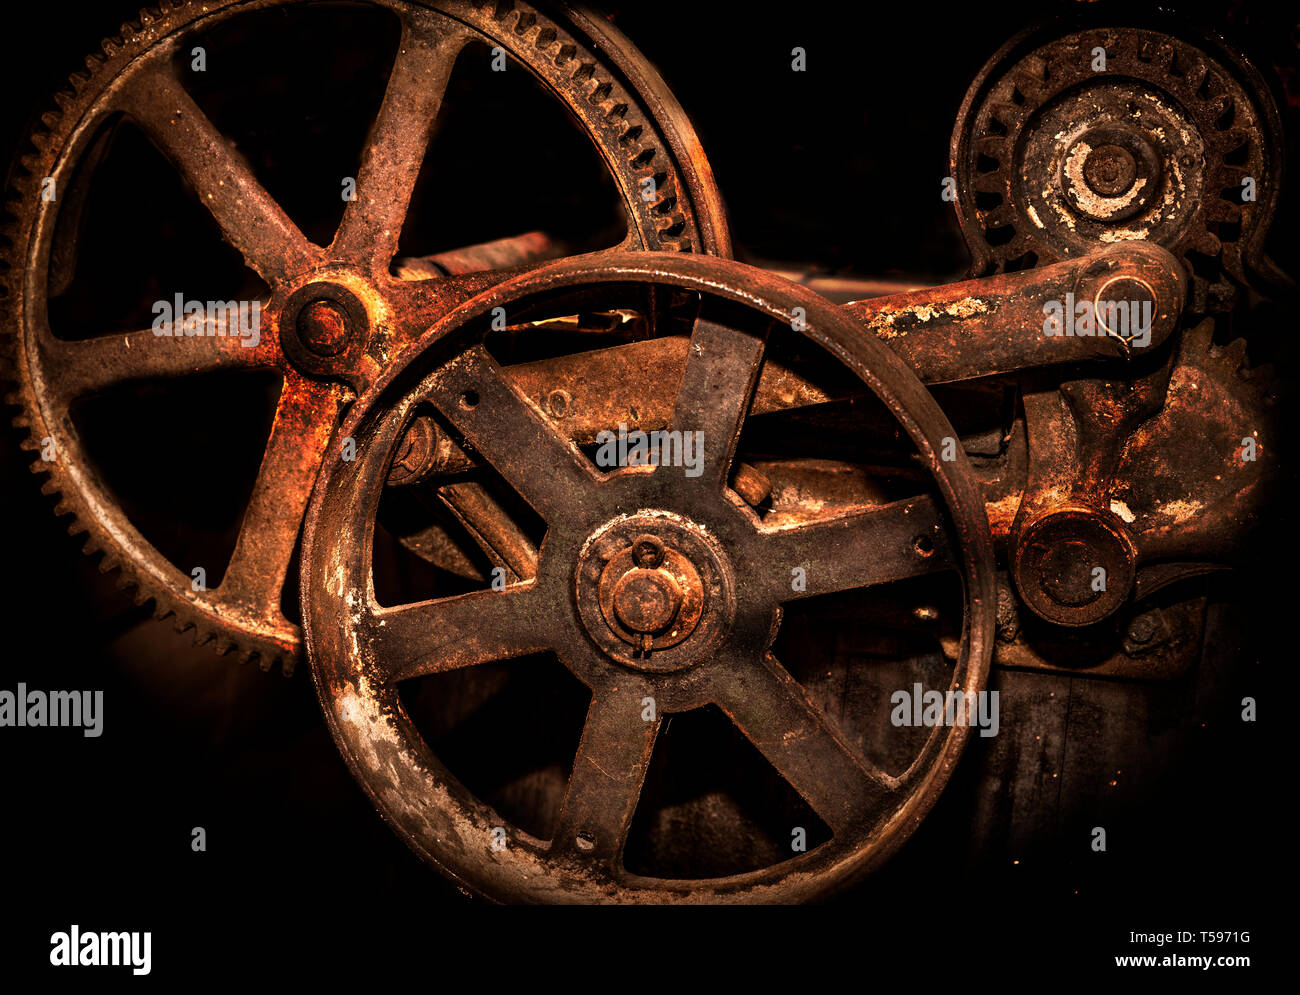 Gears on the side of an antique washing machine. Stock Photo